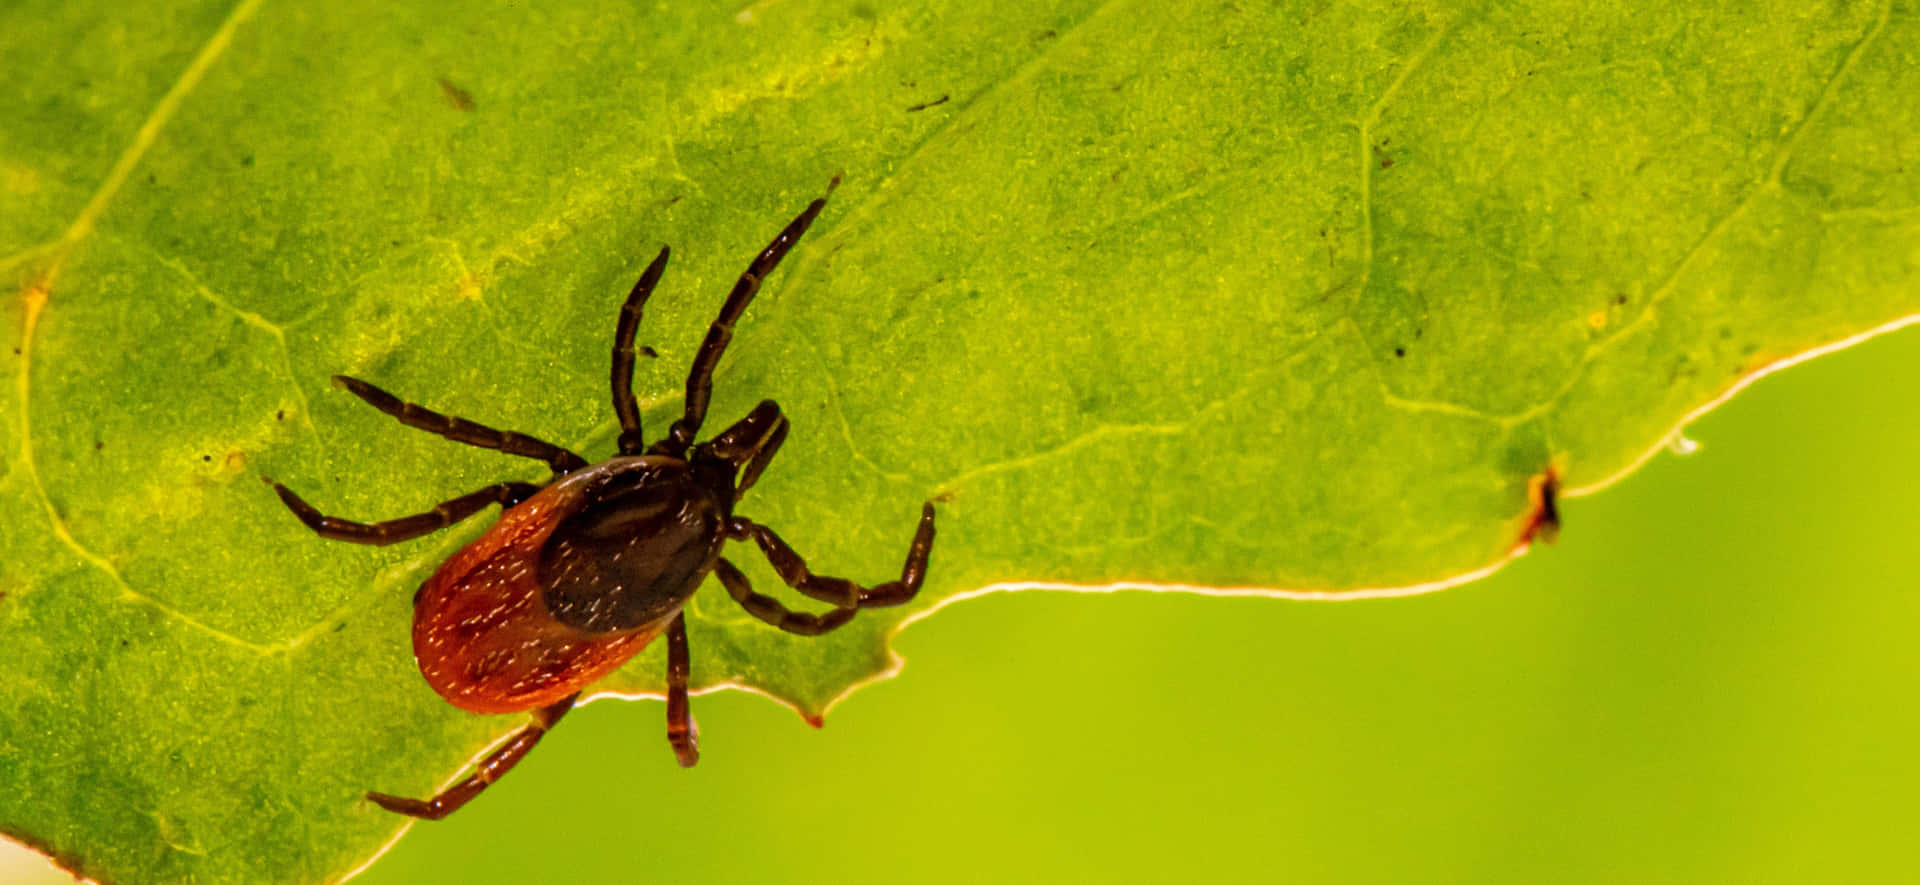 Tick Crawling In Leaf Pictures